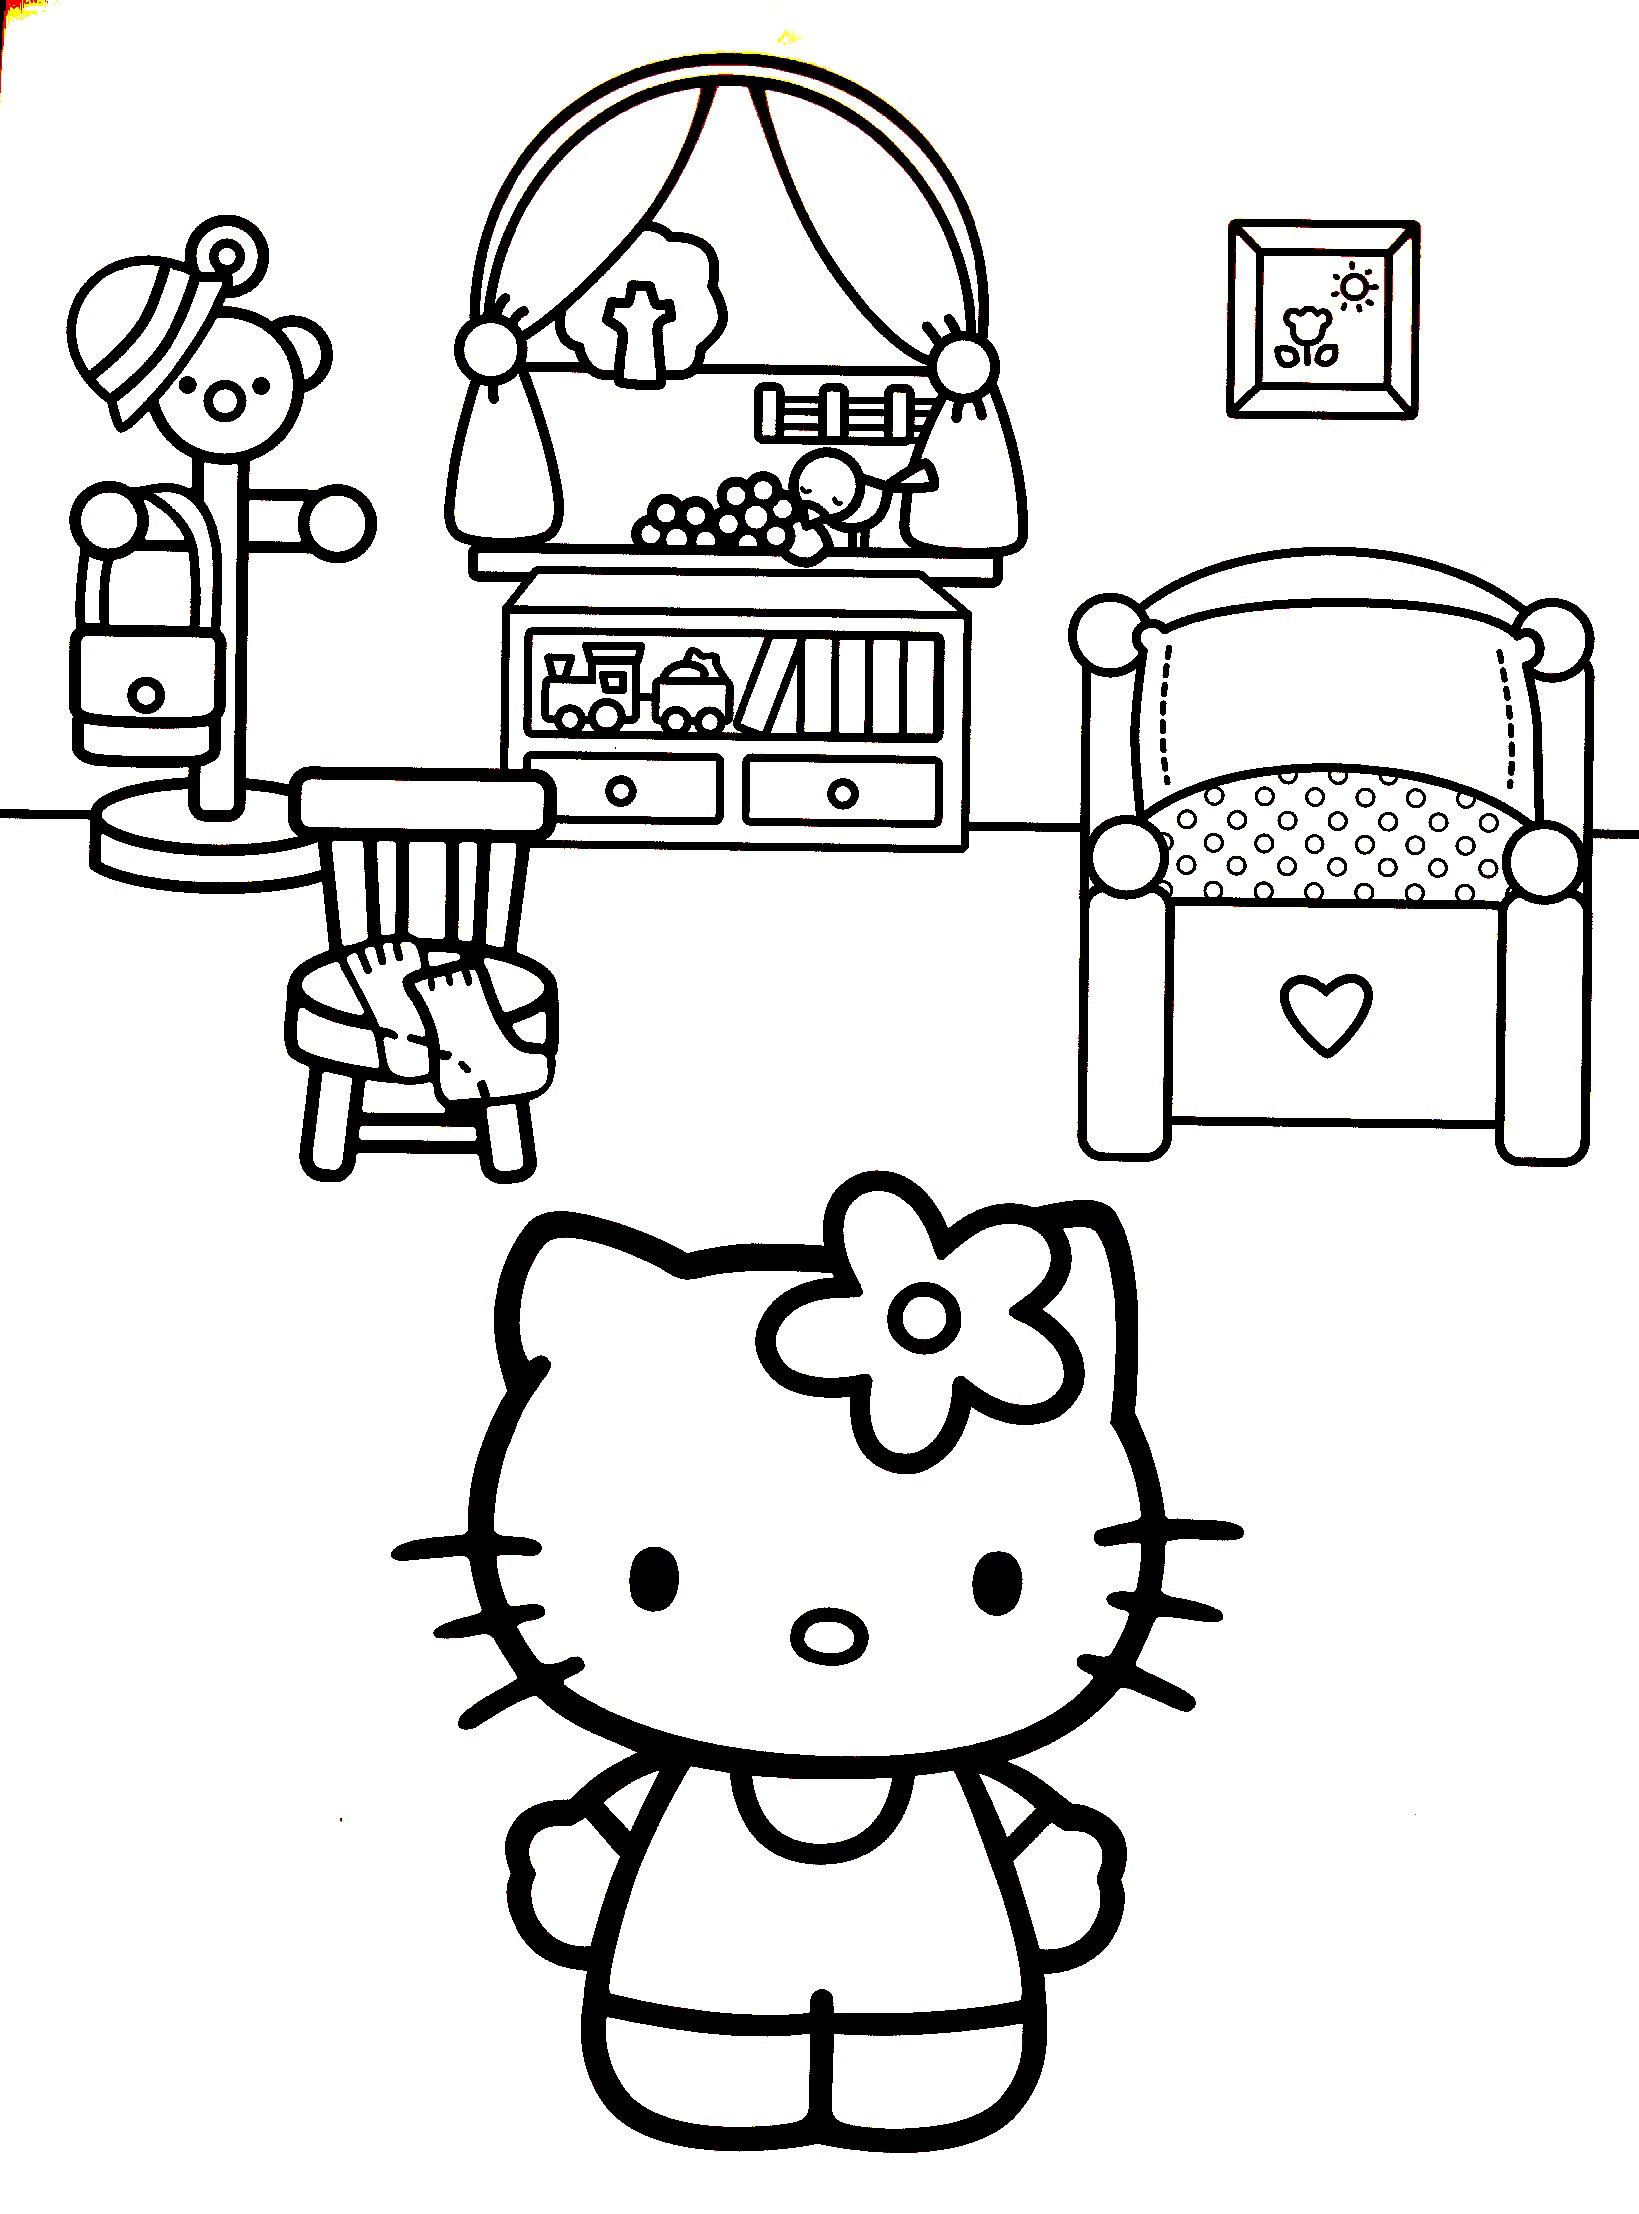 Coloriages Hello Kitty - Page 3 intérieur Dessin Hello Kitty Couleur 